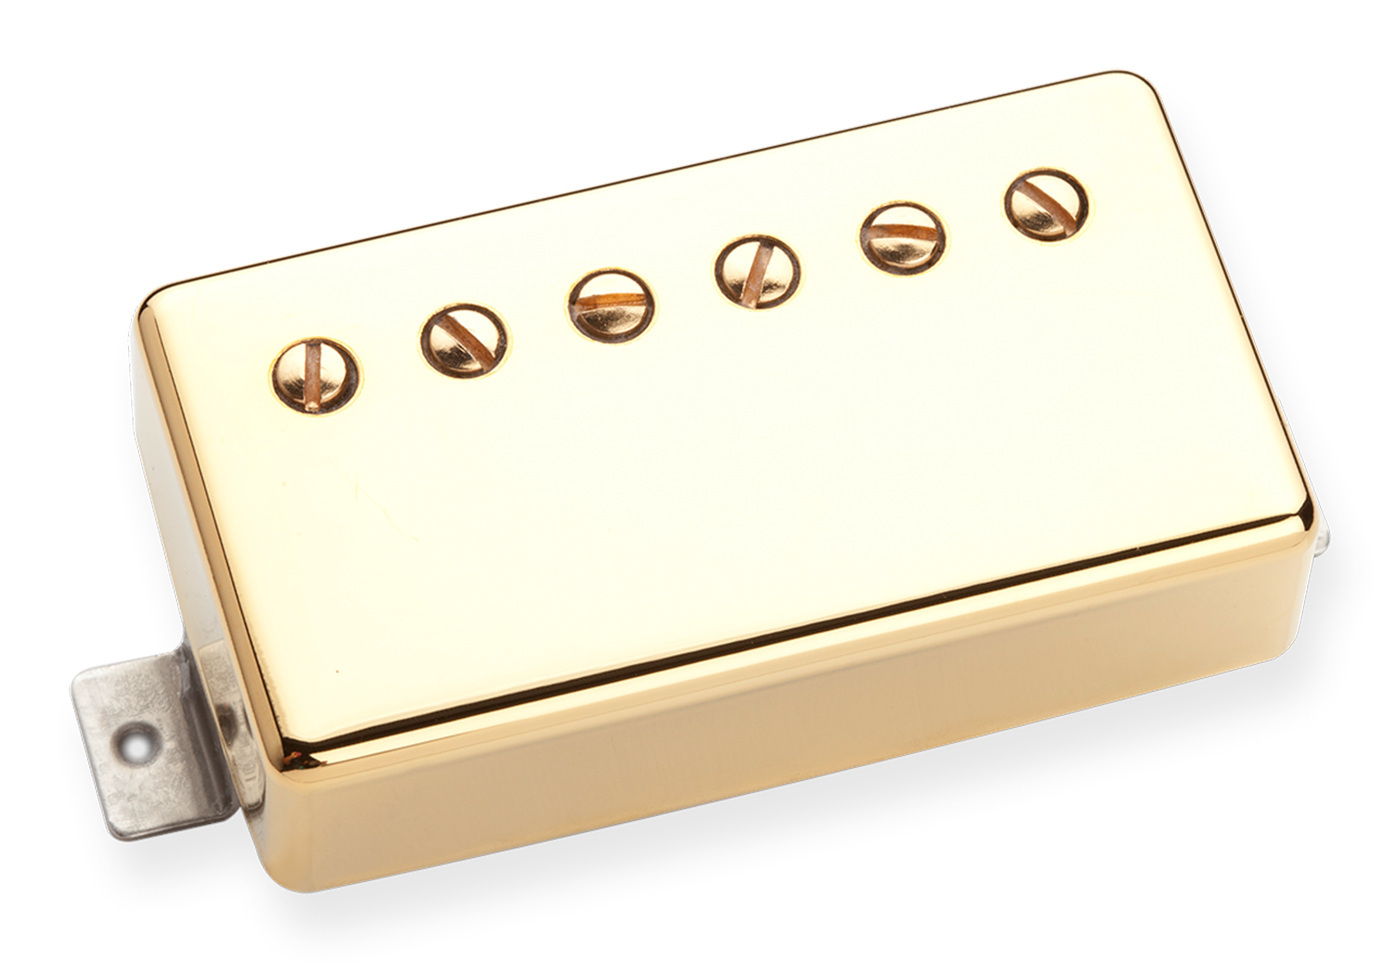 Seymour Duncan High Voltage Humbucker - Neck Pickup - Gold Cover